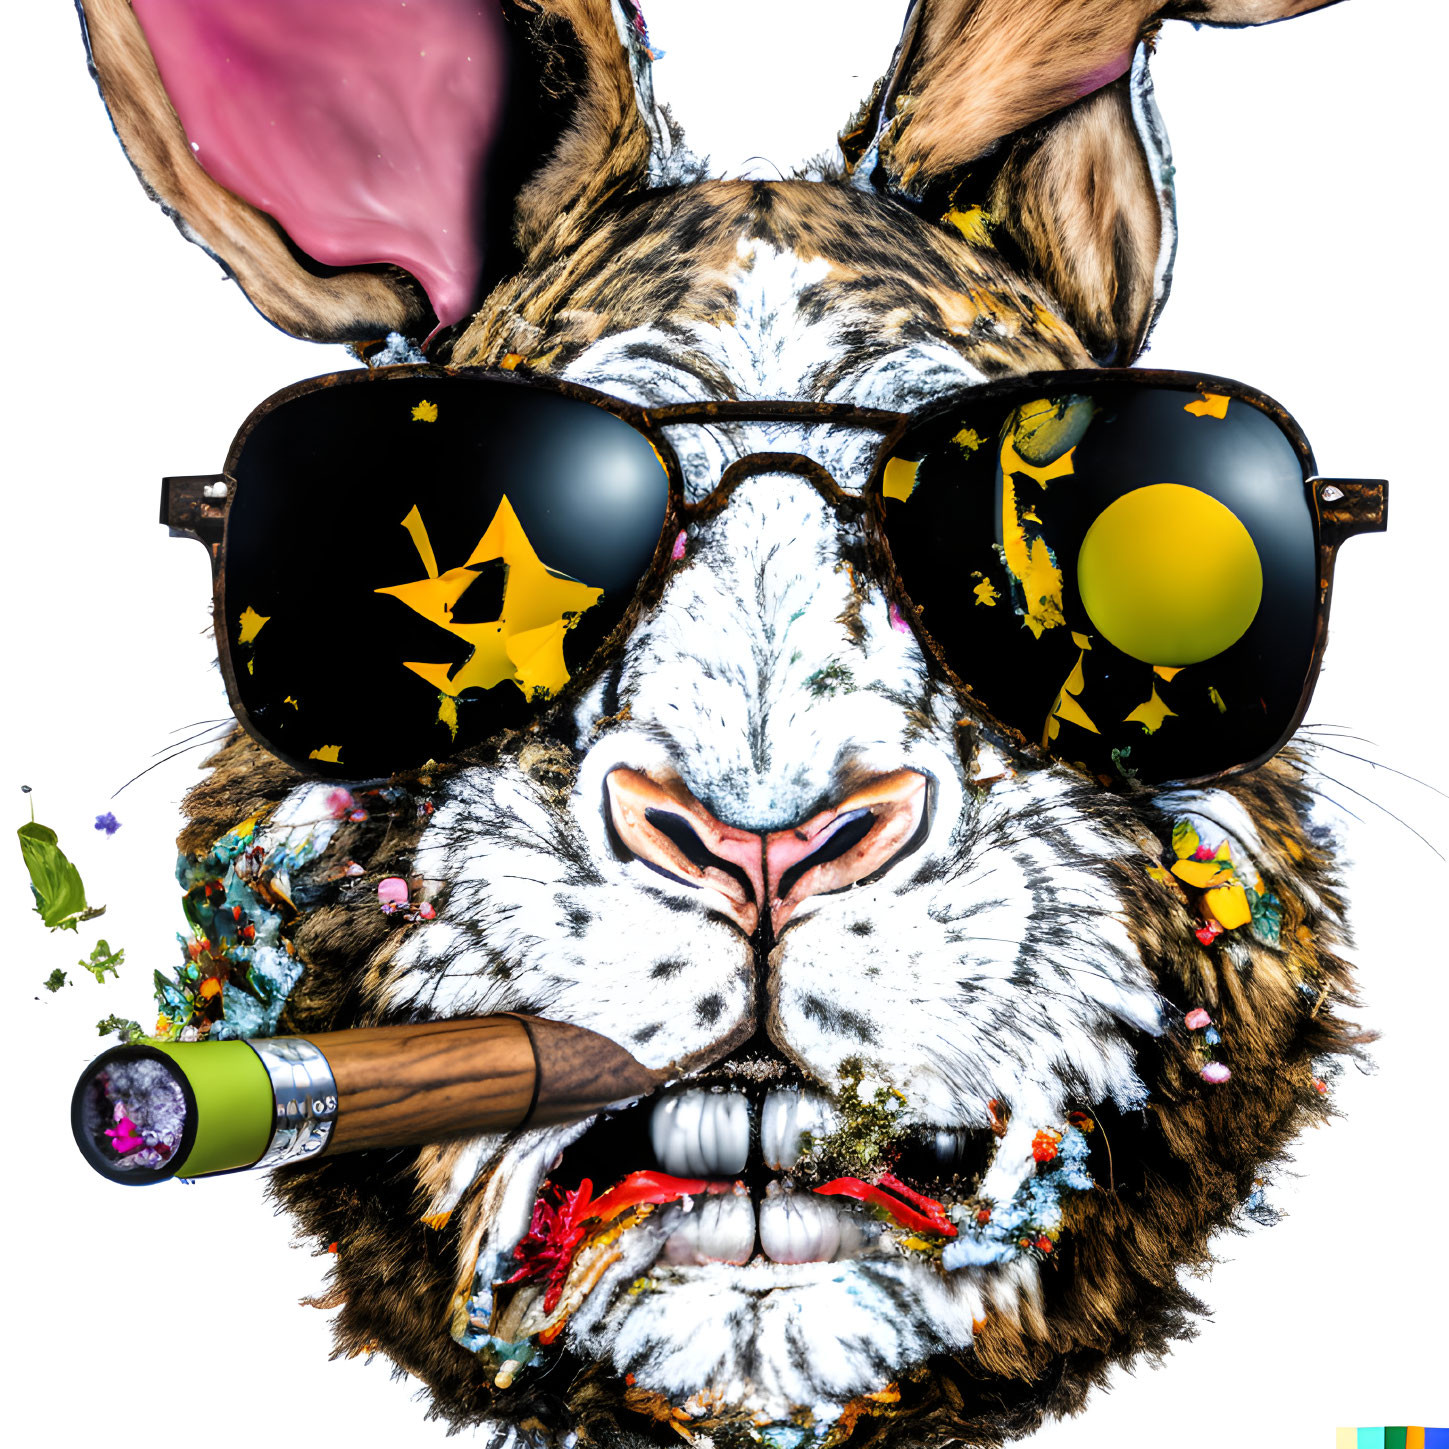 Colorful Rabbit Face with Sunglasses and Cigar on White Background